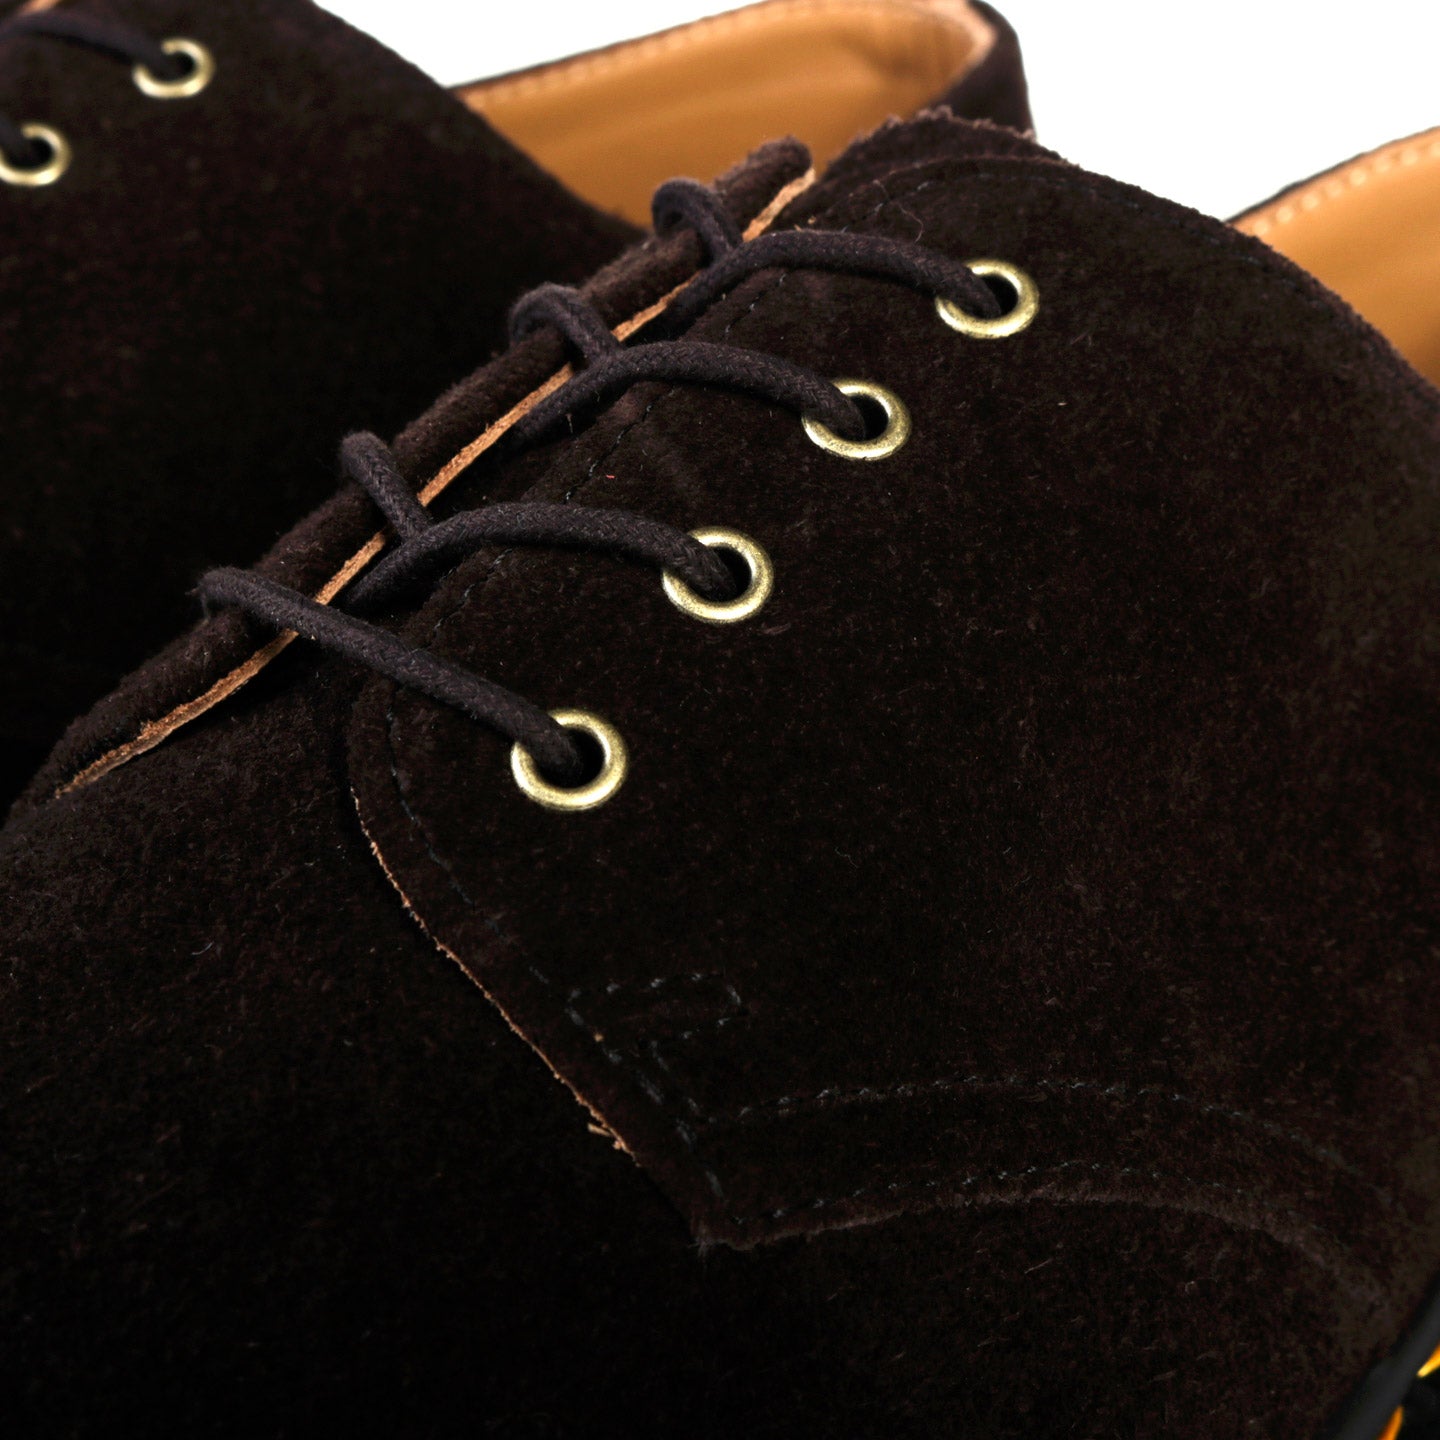 DR. MARTENS SMITHS CHOCOLATE SUEDE